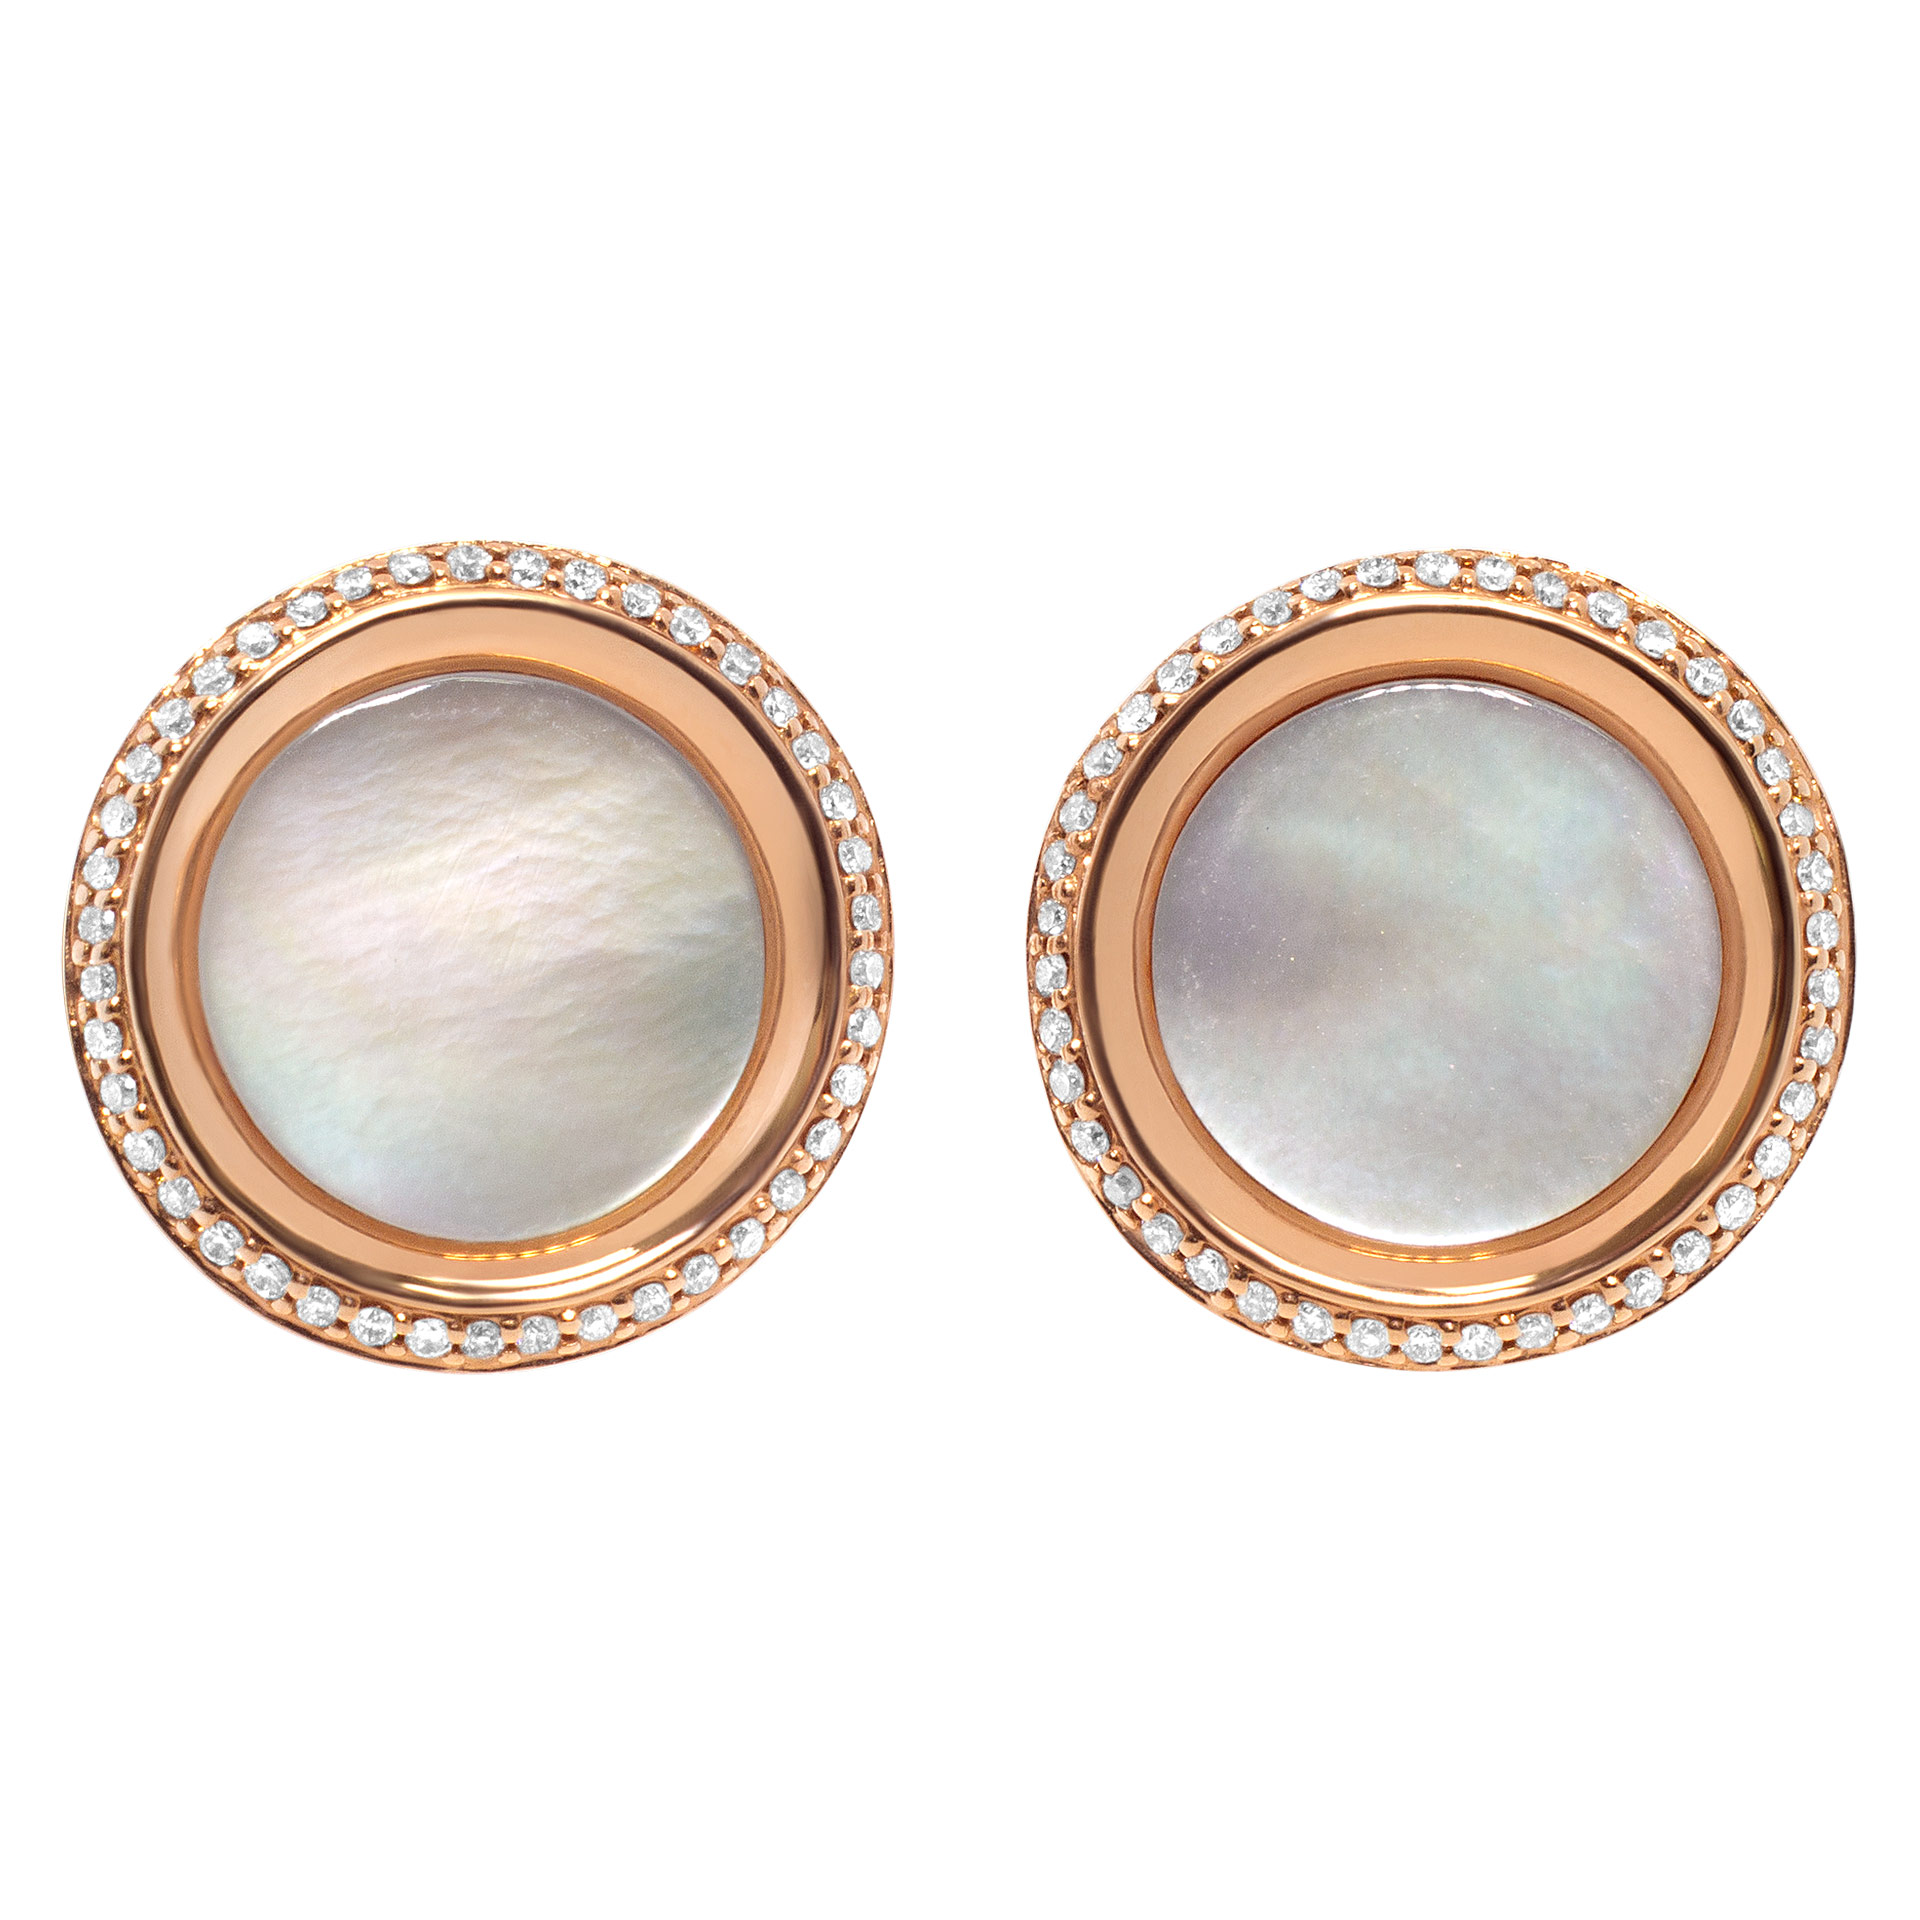 Mother of pearl round cufflinks in 18k pink gold with 0.26 carat in diamonds